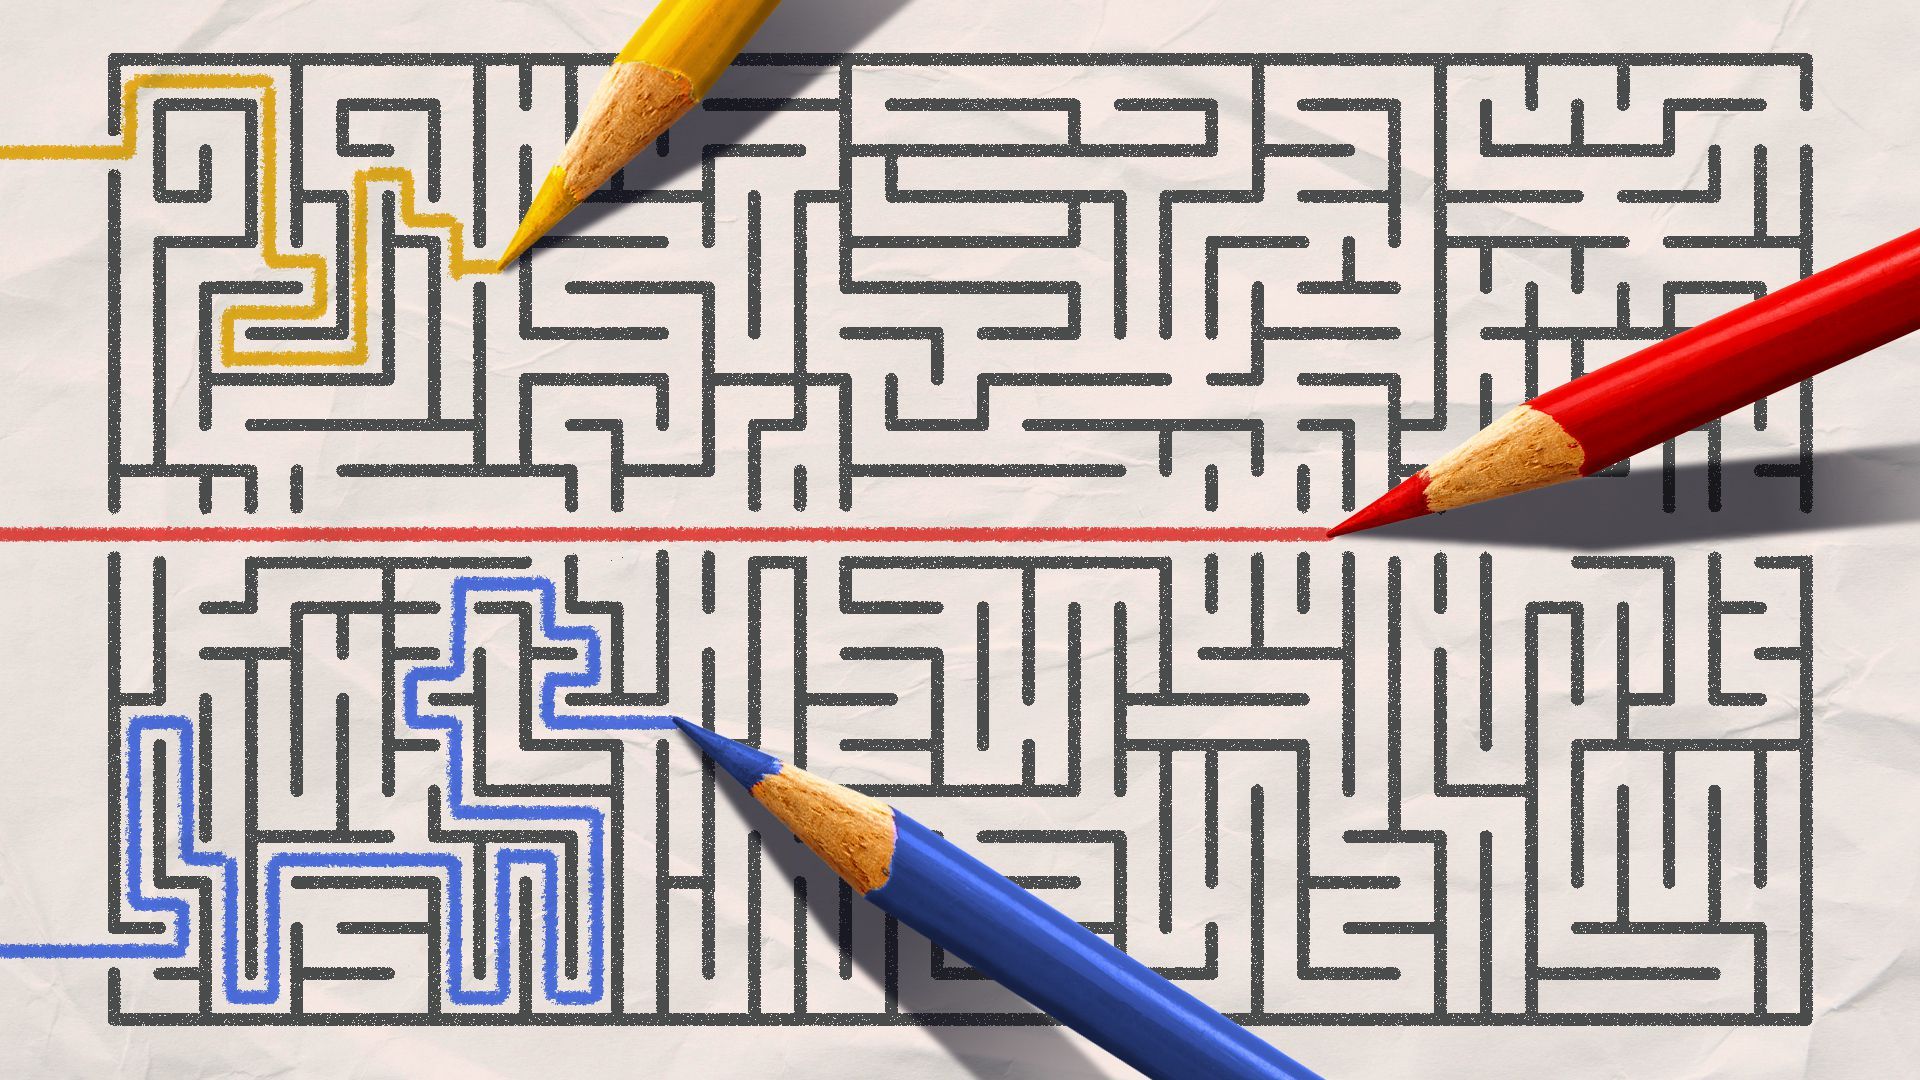 Illustration of three pencils drawing their way through a maze, with one pencil going straight through the center